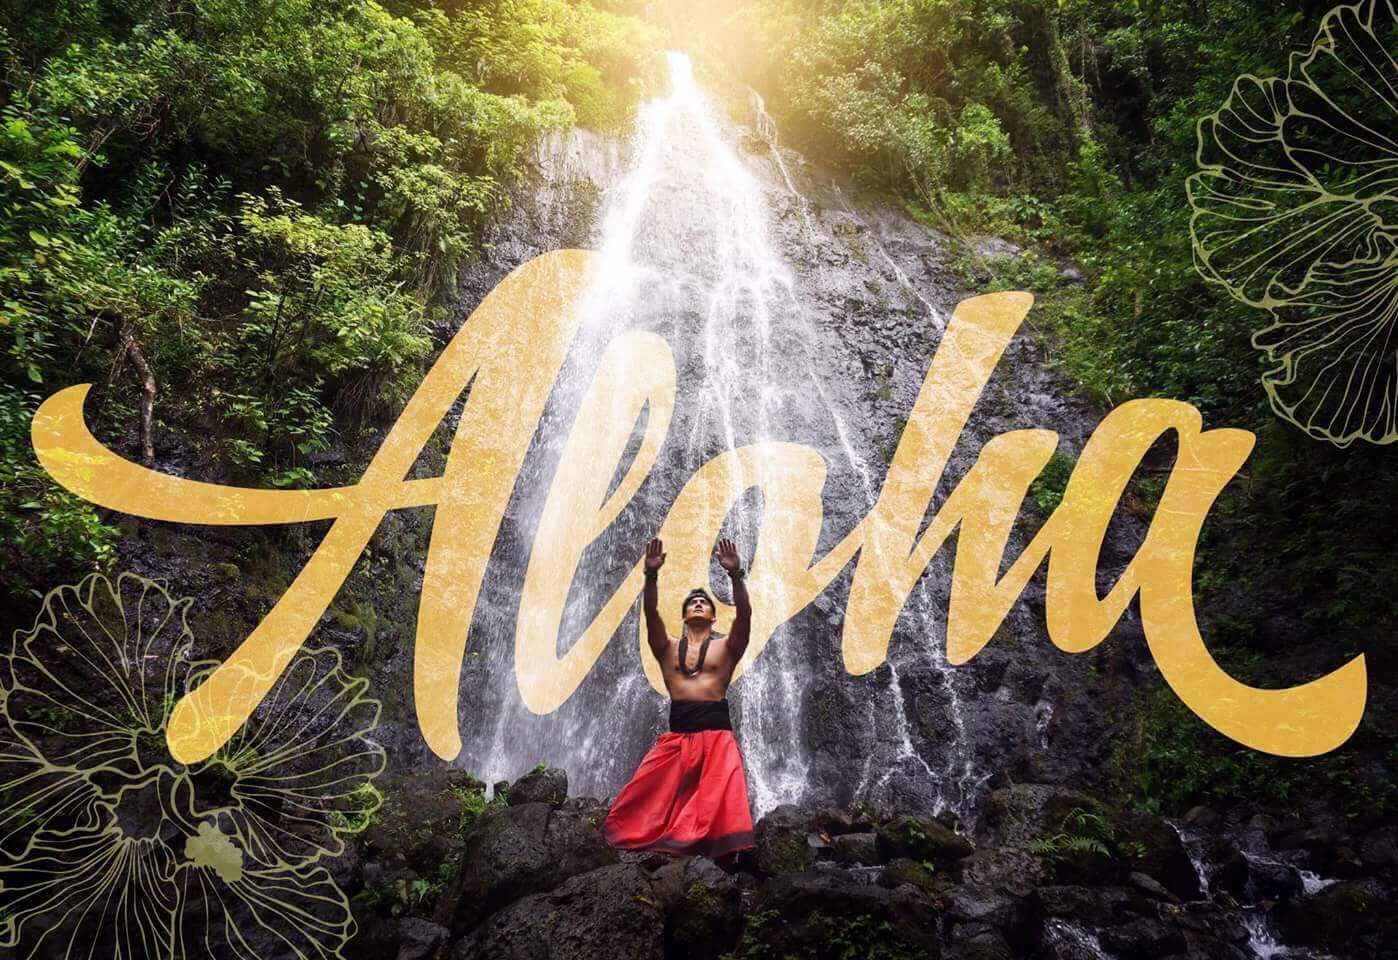 His Name Is Alaka’i Lastimado – That Guy in The Hula Video That Went Viral – Official Hashtag #AlohaAlakai :)